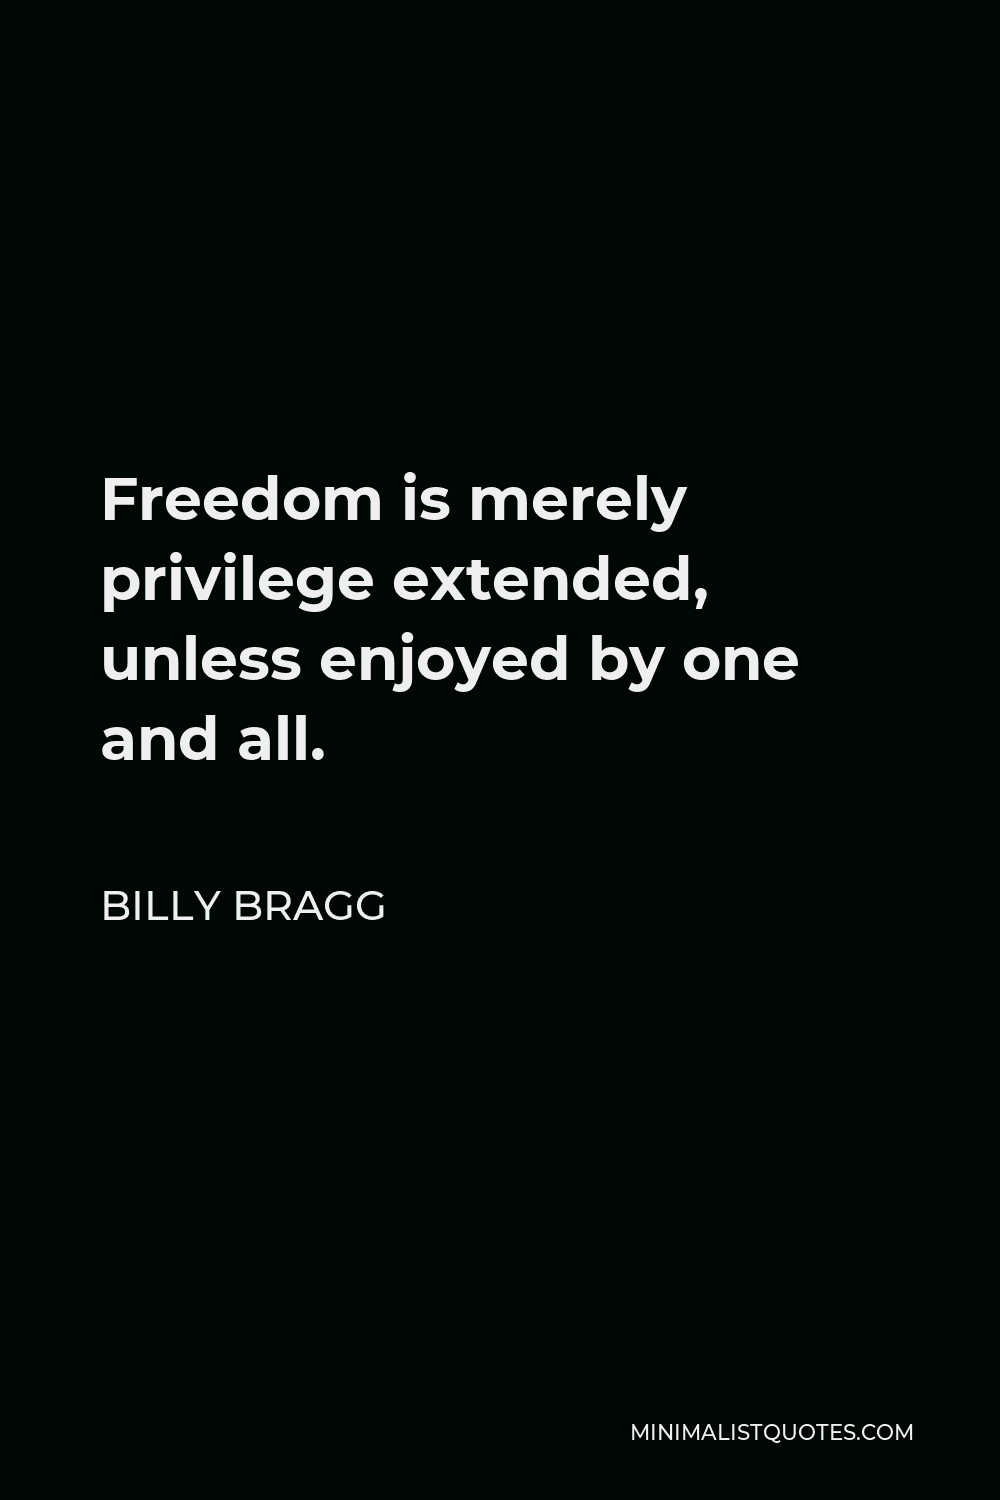 Billy Bragg Quote - Freedom is merely privilege extended, unless enjoyed by one and all.